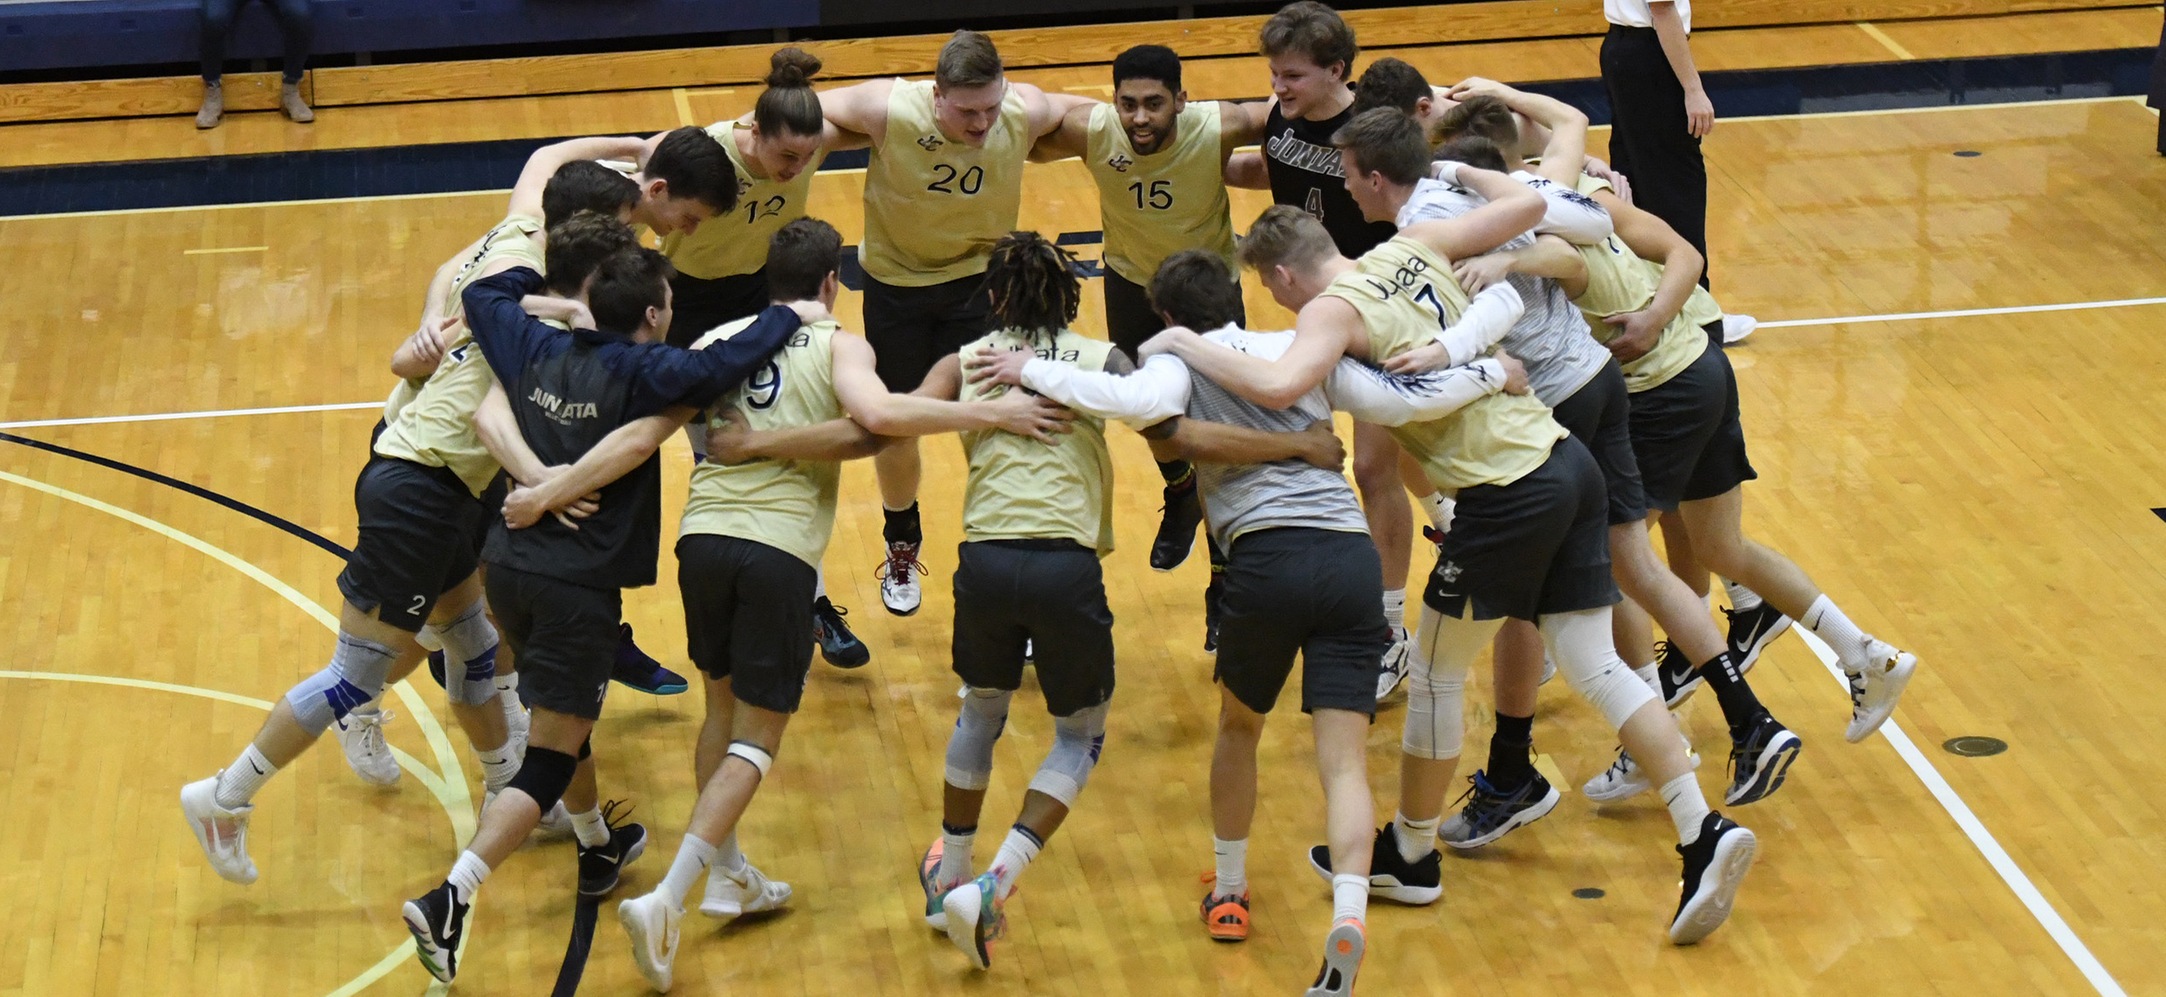 Eagles Sweep Aside #7 Cougars to Reach CVC Championship